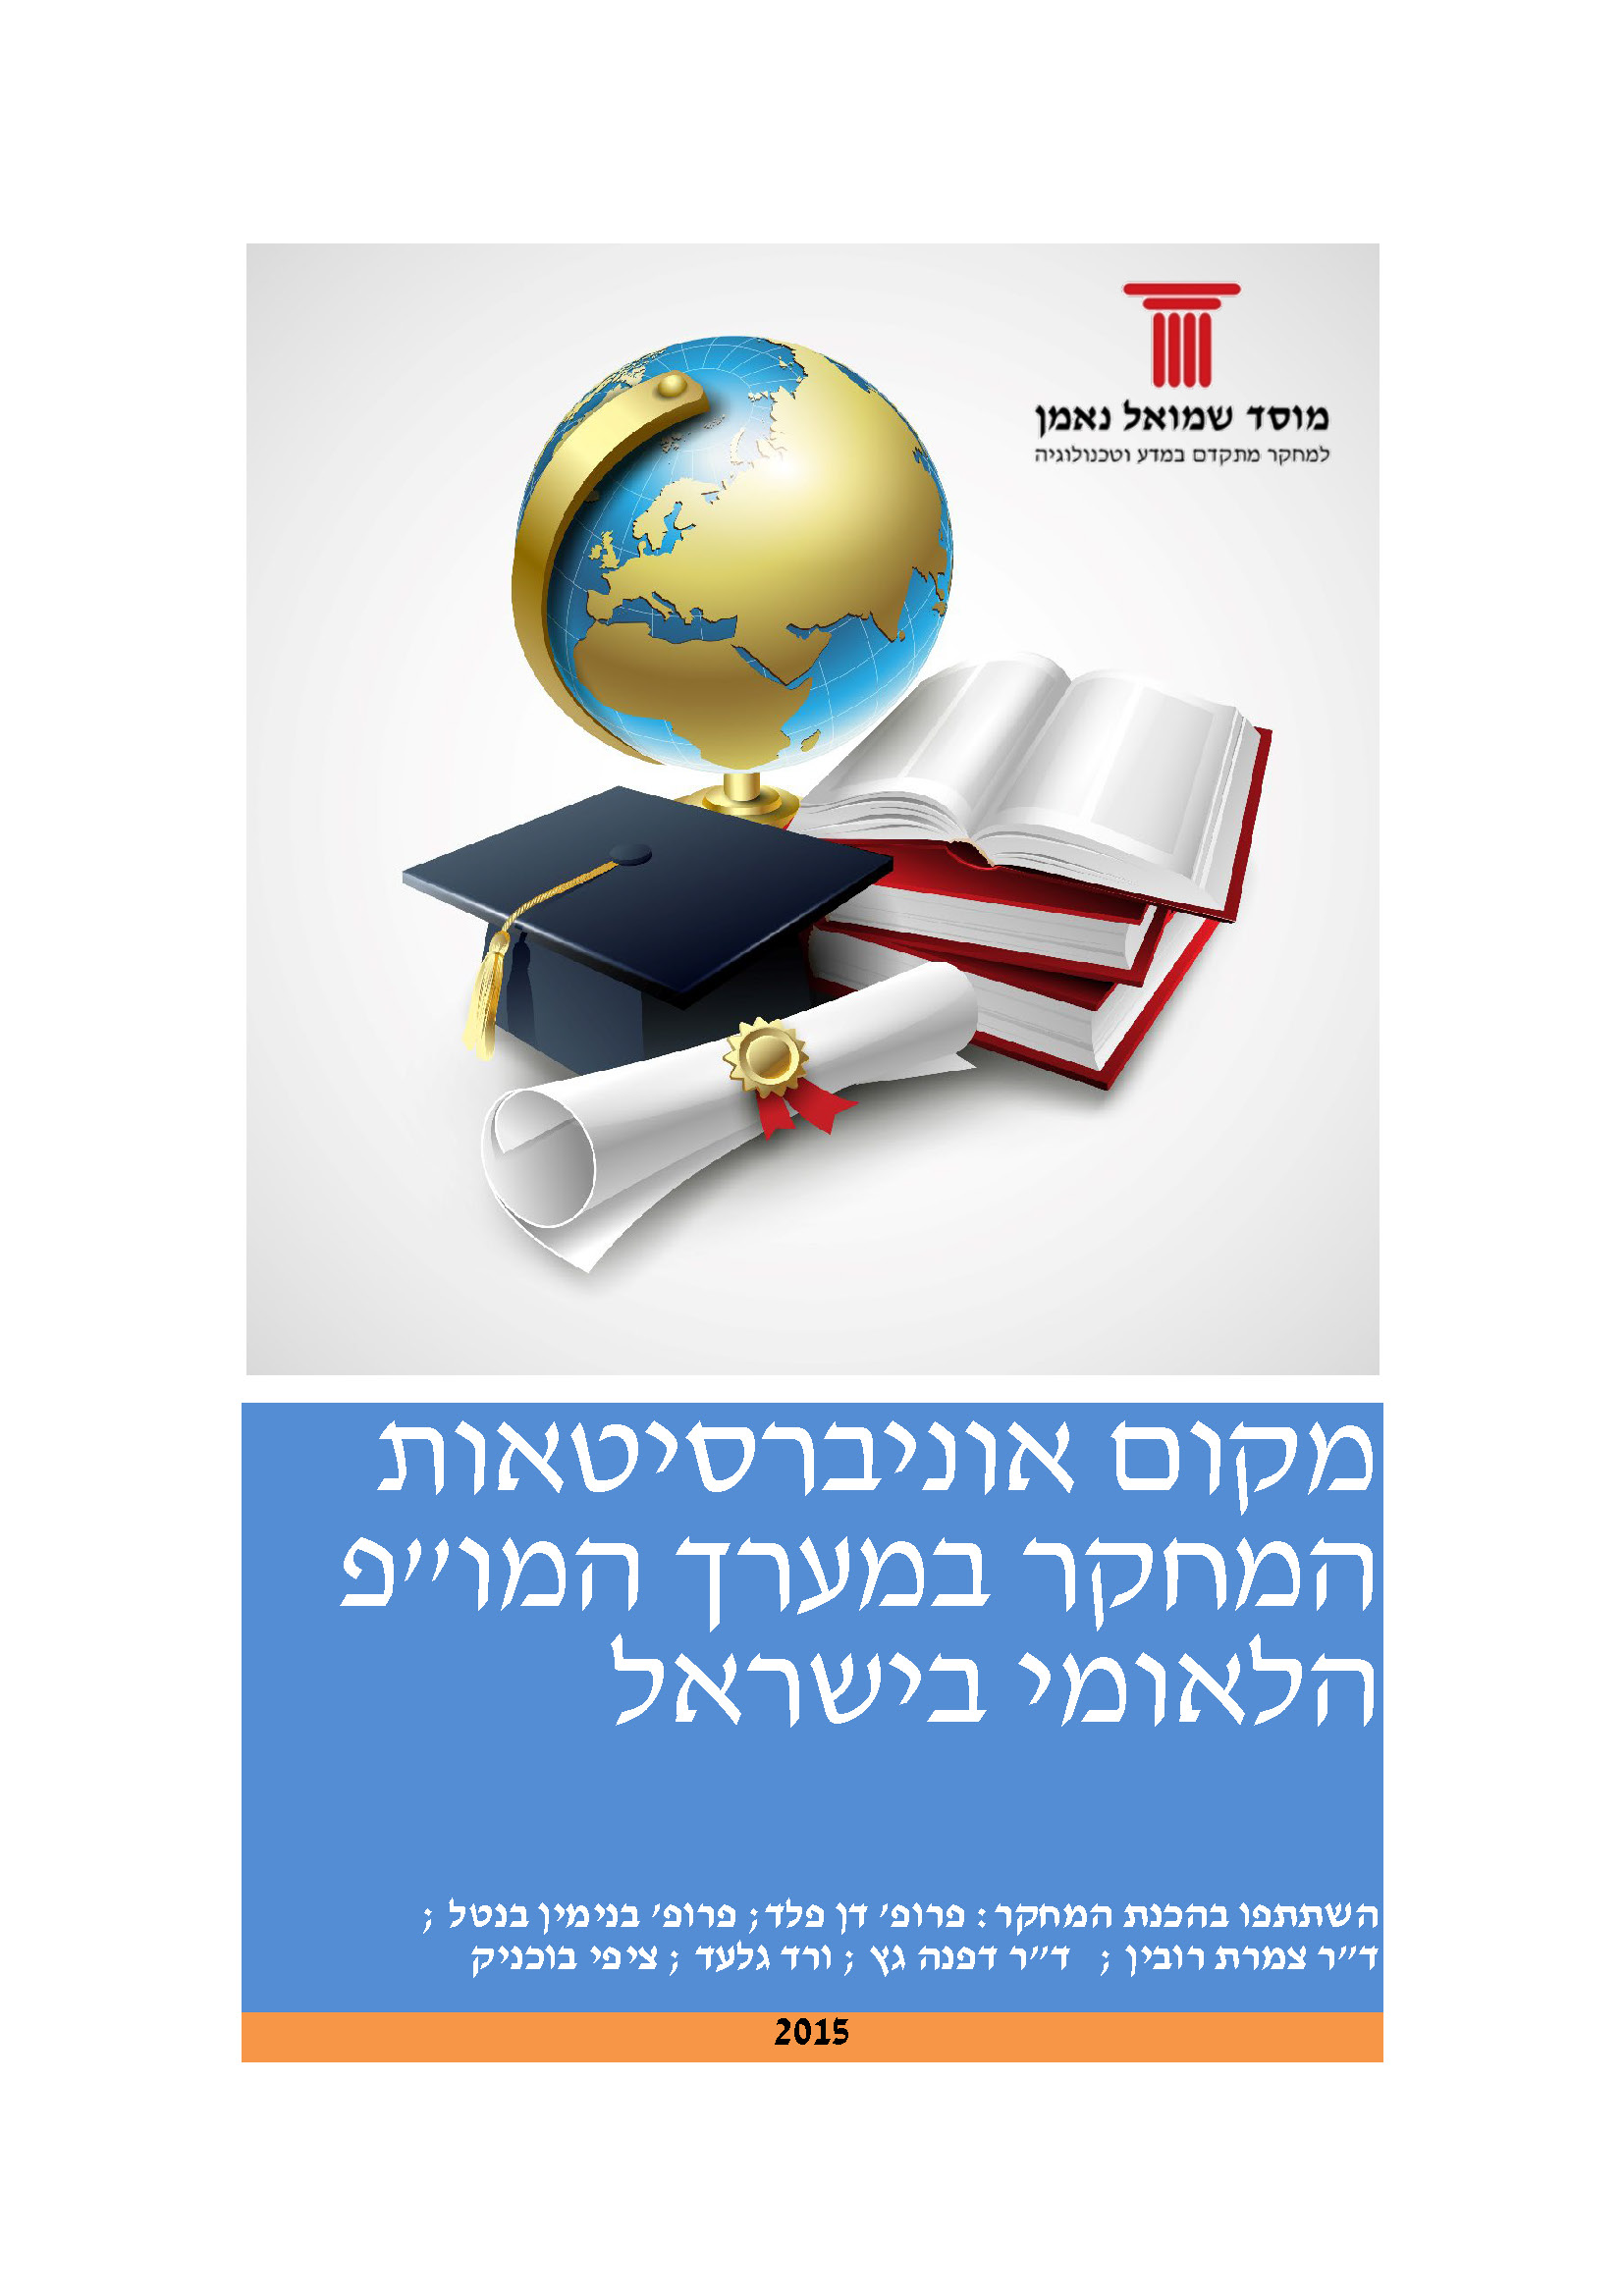 Research universities in the national R&D in Israel